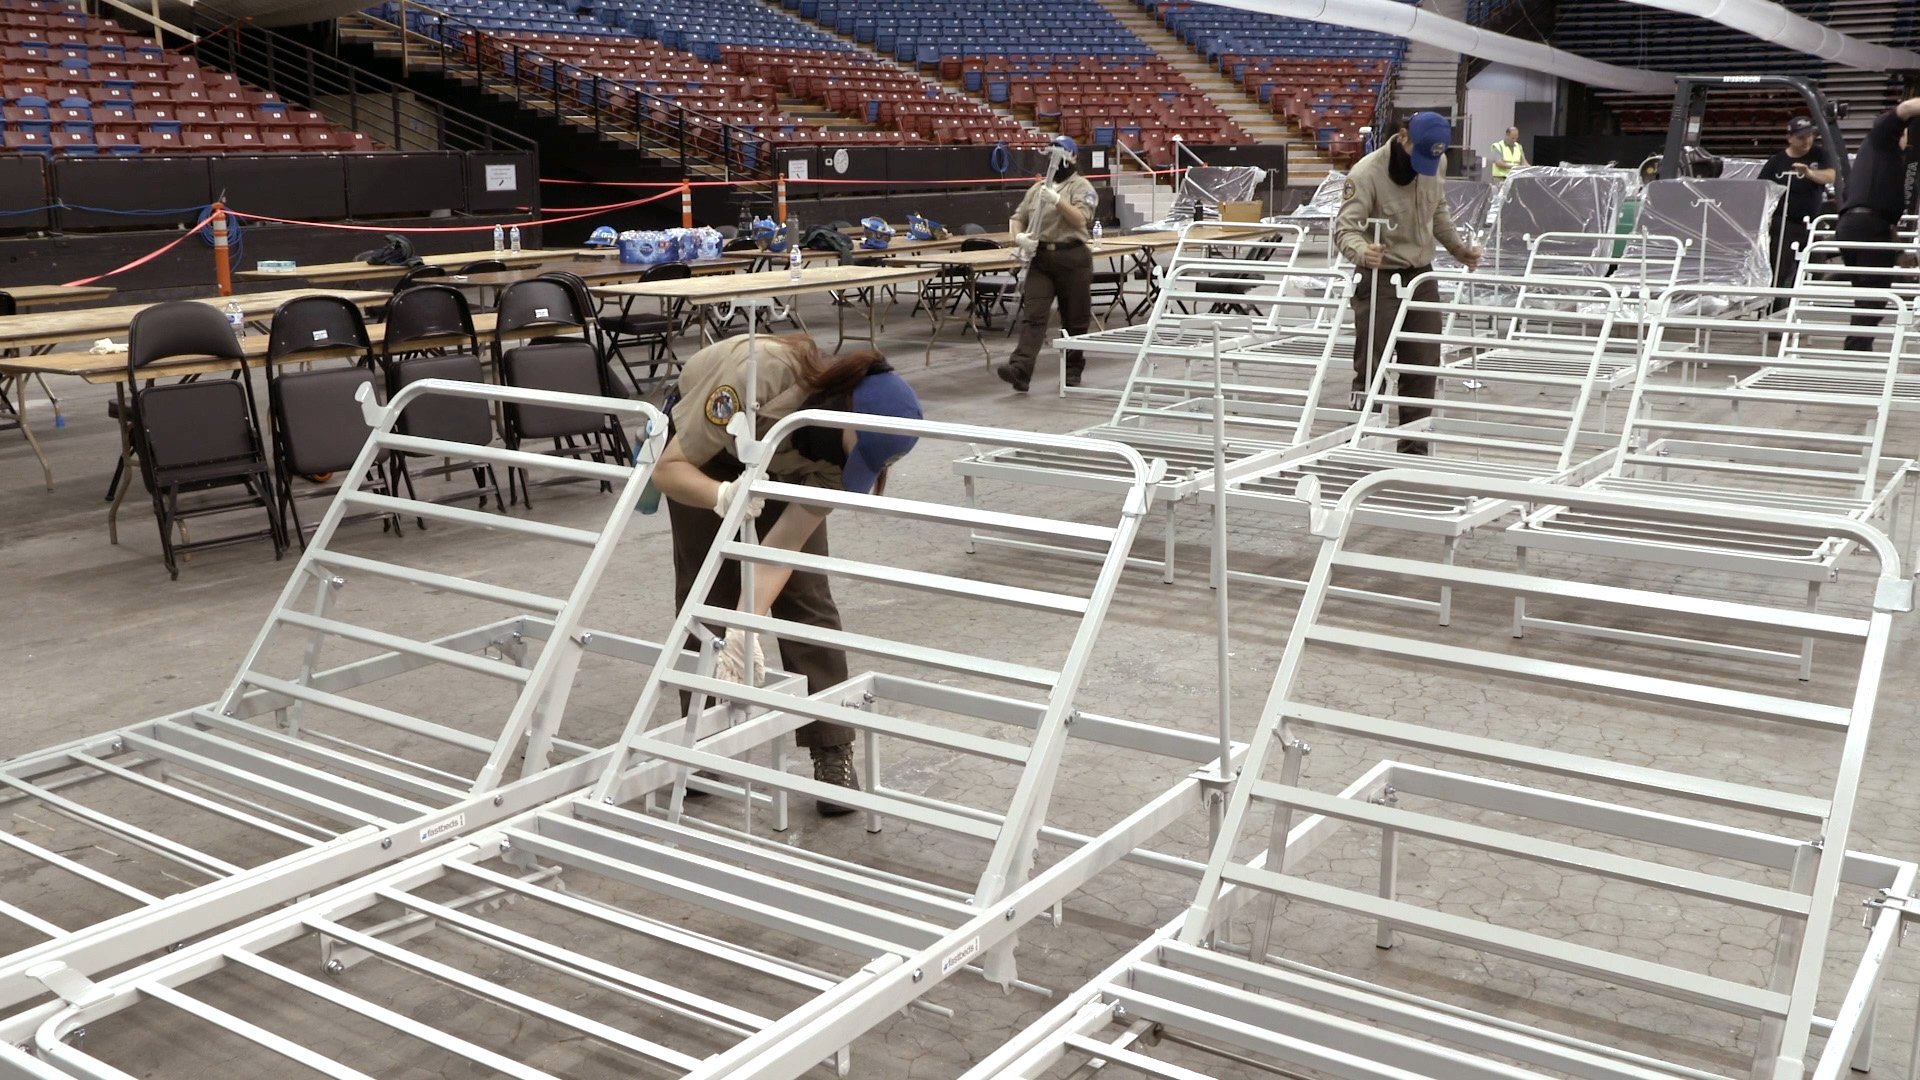 corpsmembers set up hospital beds in arena